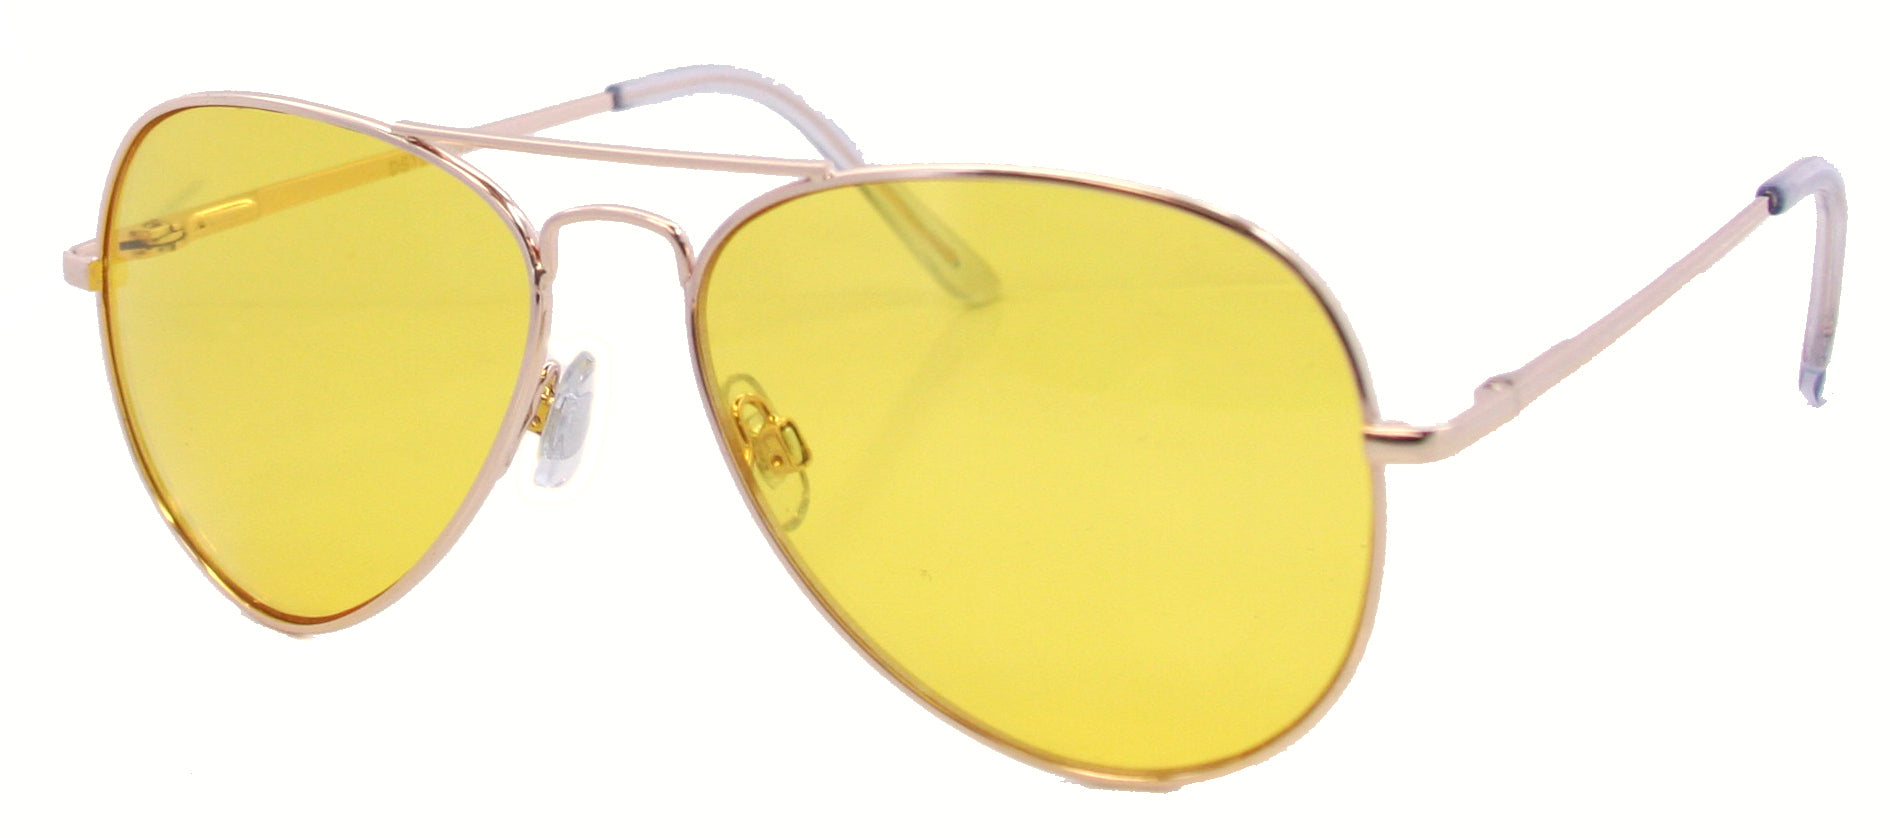 DST8302ND -  Wholesale Aviator Style Night Driving Glasses in Gold